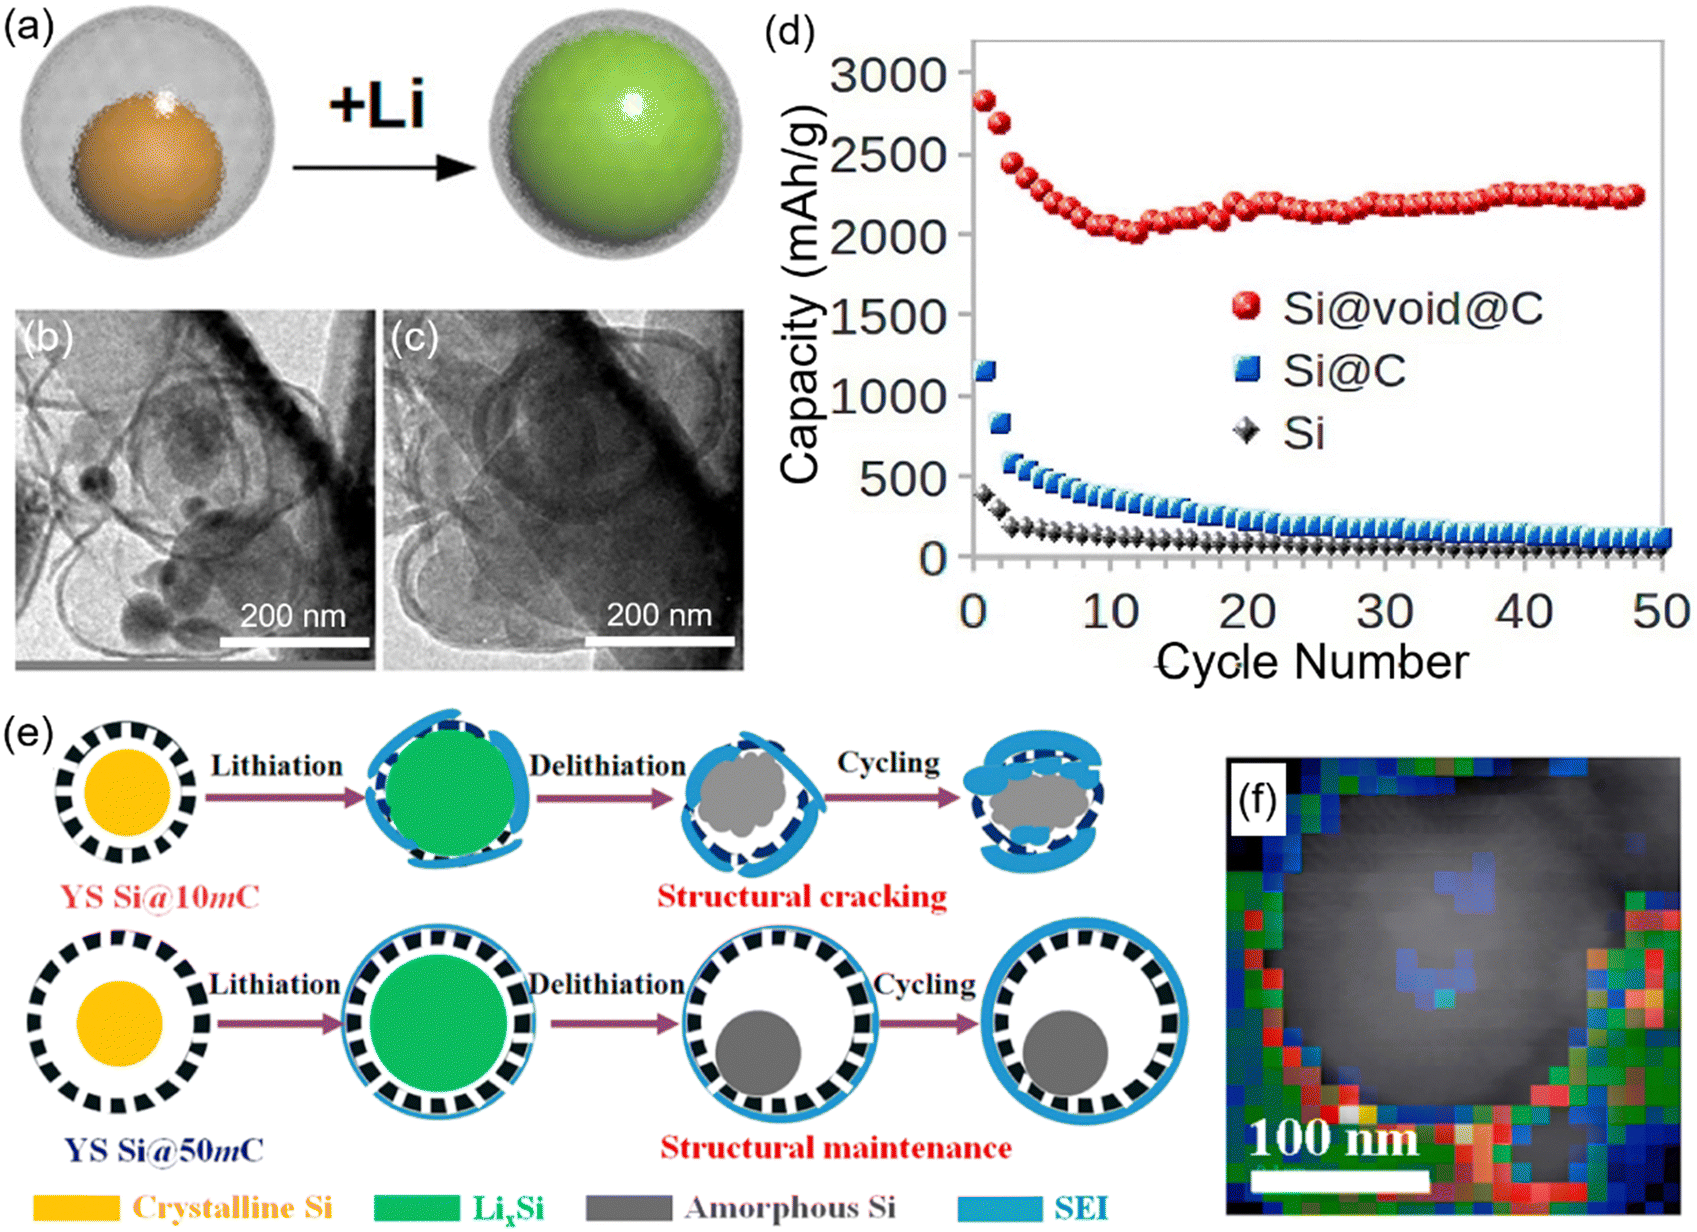 Enhancing composite electrode performance: insights into interfacial  interactions - Chemical Communications (RSC Publishing)  DOI:10.1039/D3CC05608B